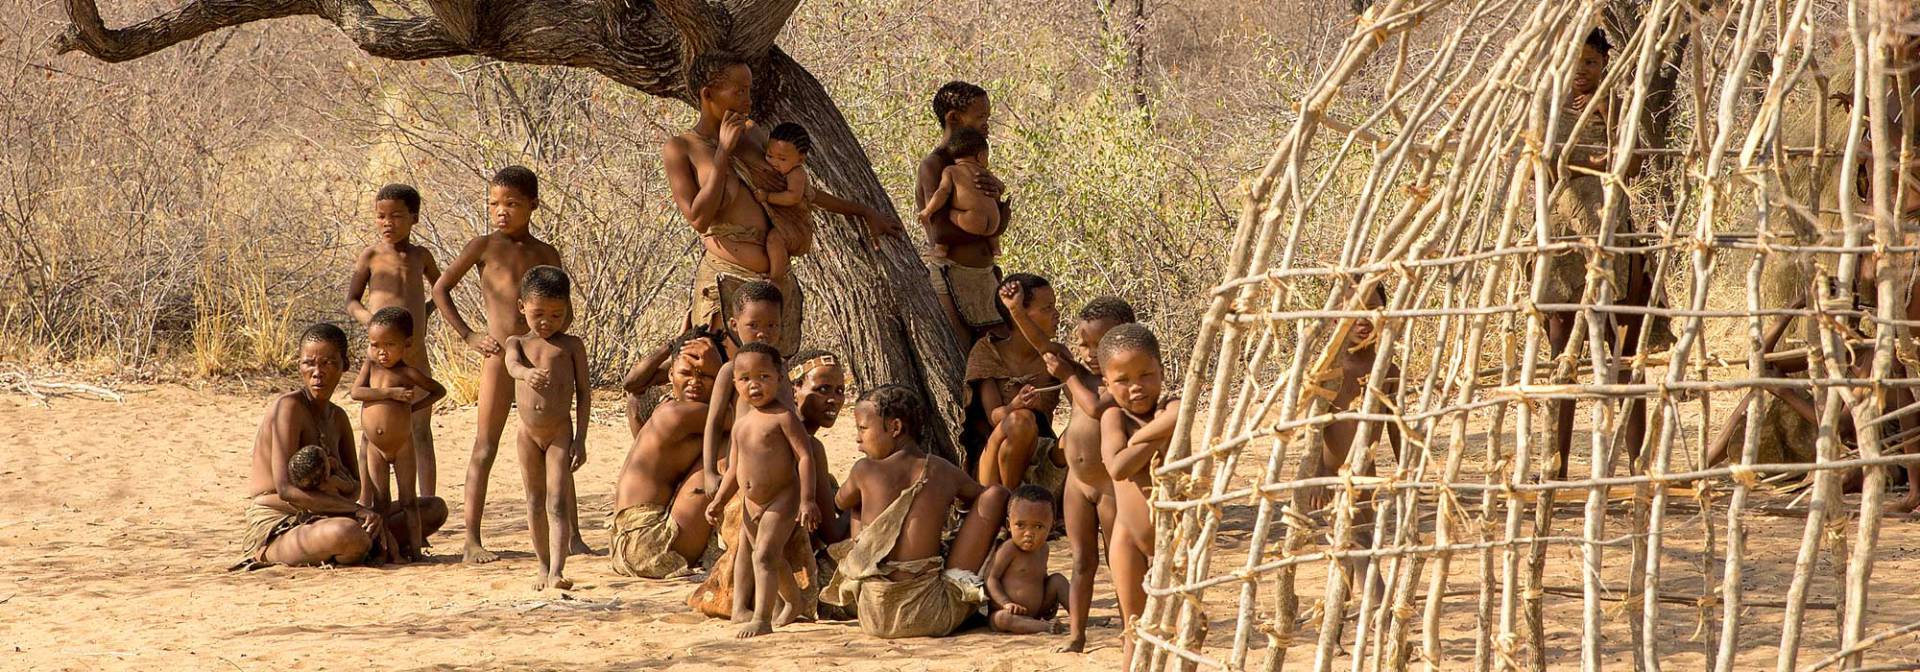 San culture in Namibia